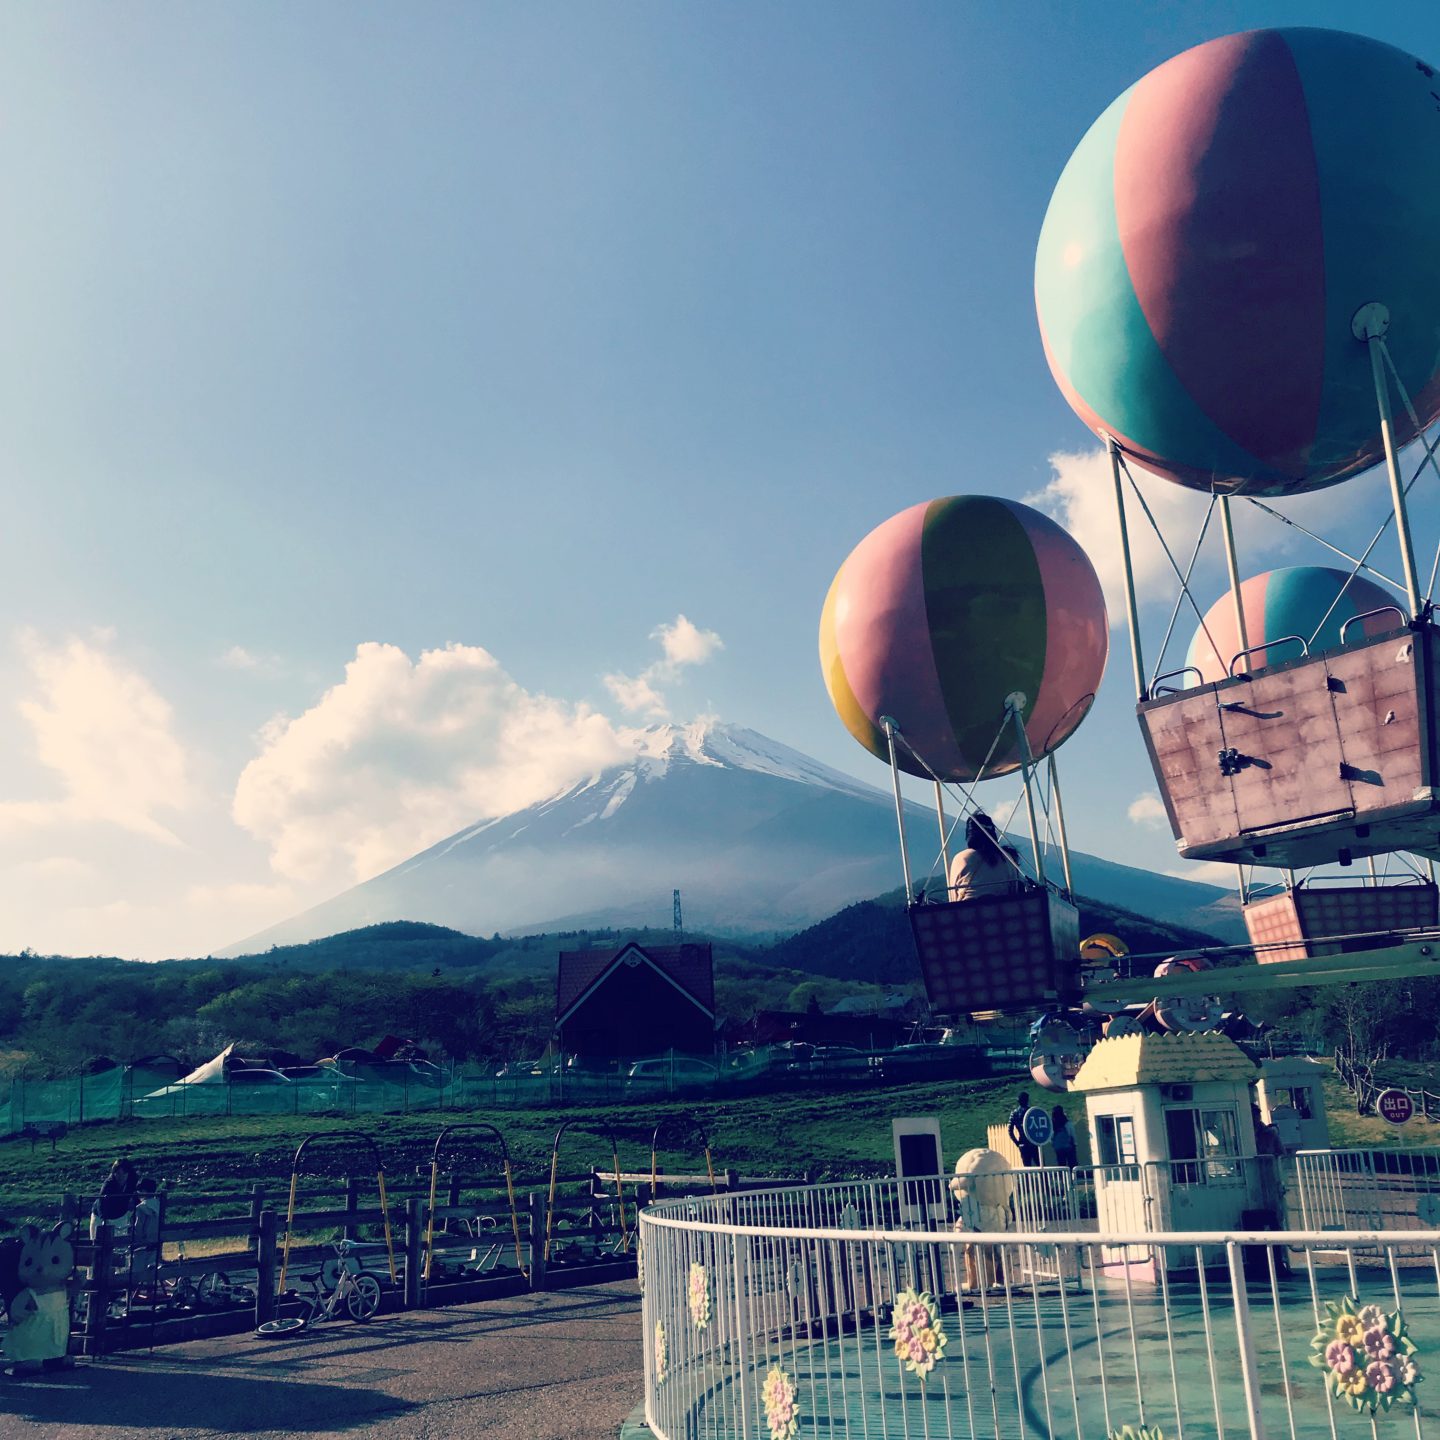 YOU DON’T “GO” TO MT FUJI, YOU “GO SOMEWHERE TO TAKE IN MT FUJI”